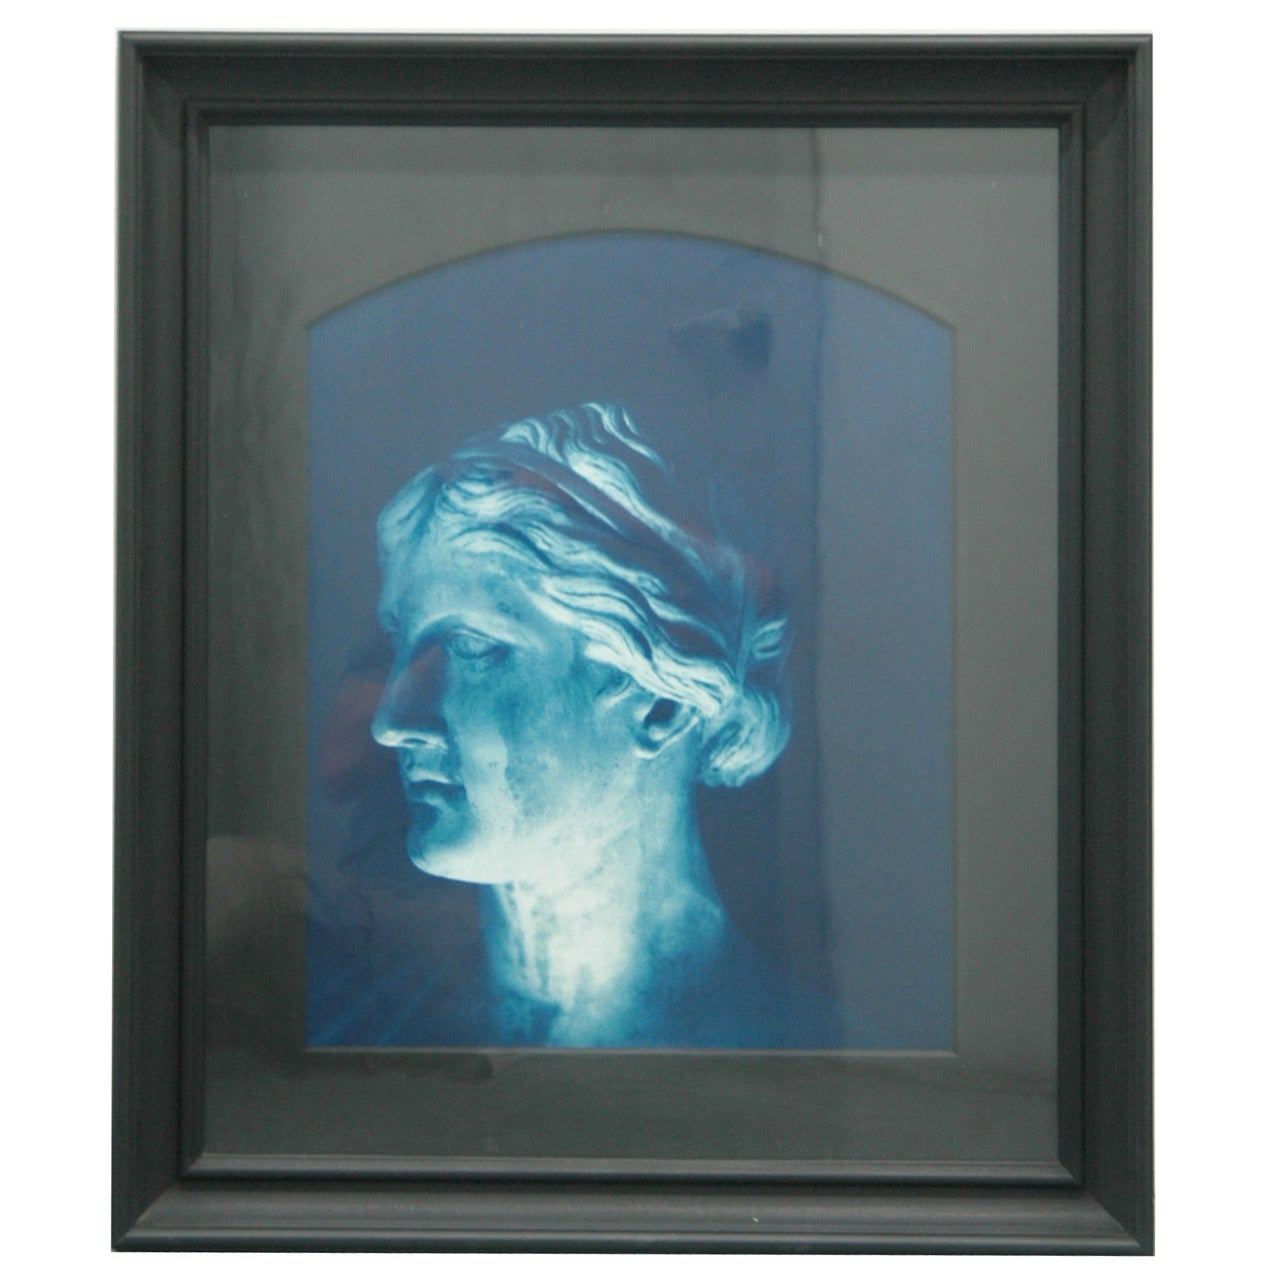 "Photograph of a Grecian Bust" by John Dugdale For Sale